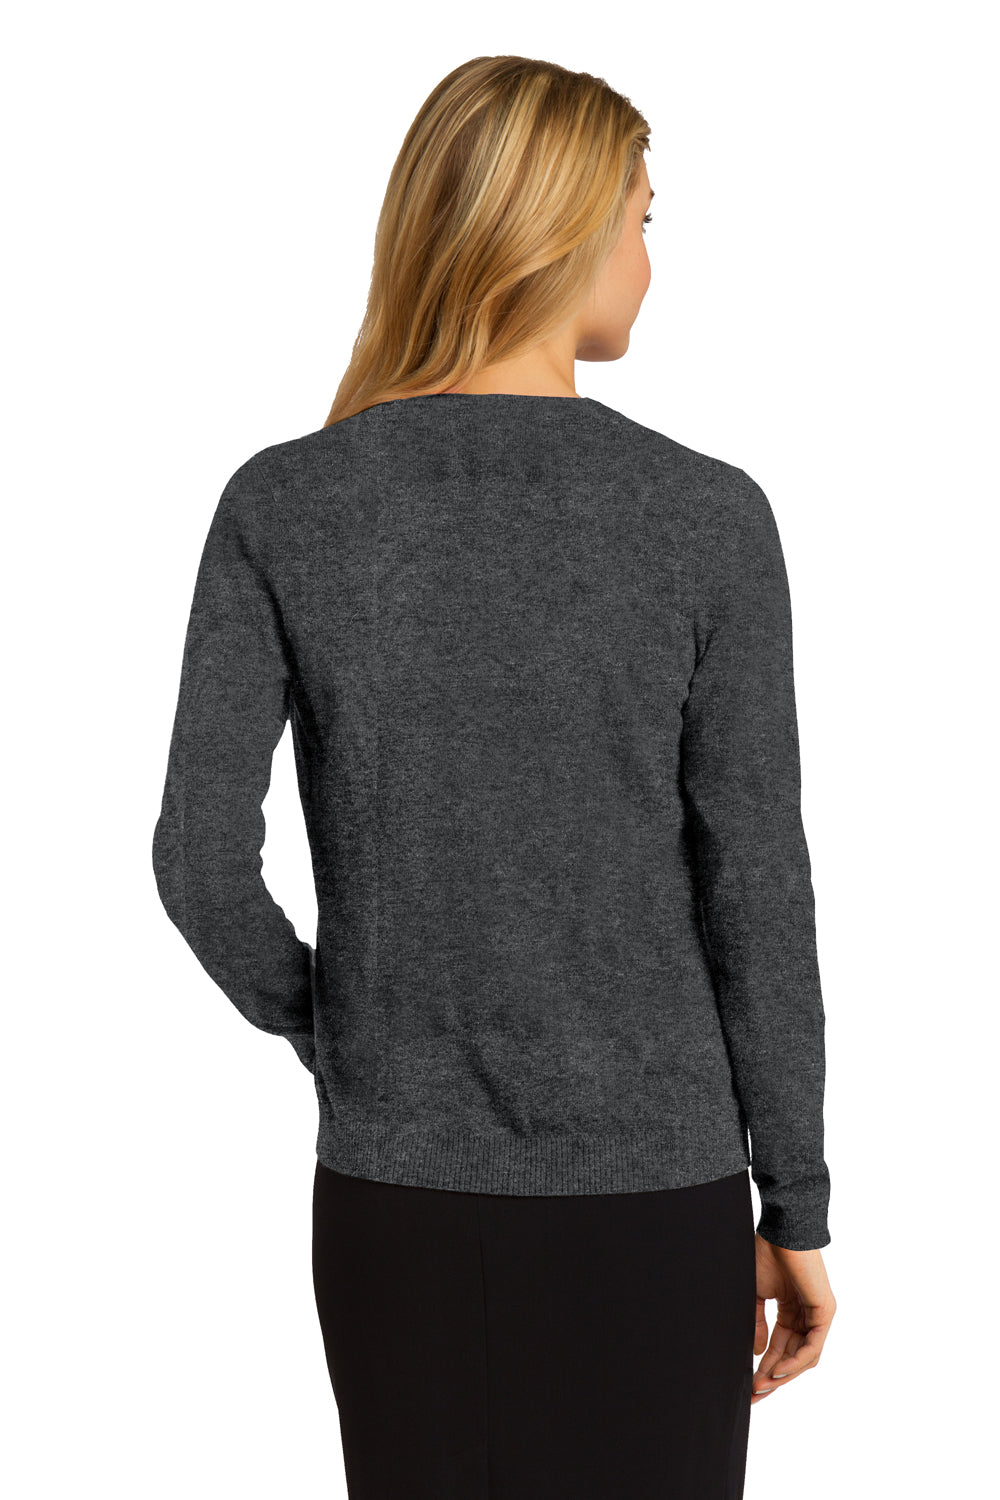 Port Authority LSW287 Womens Long Sleeve Cardigan Sweater Heather Charcoal Grey Back